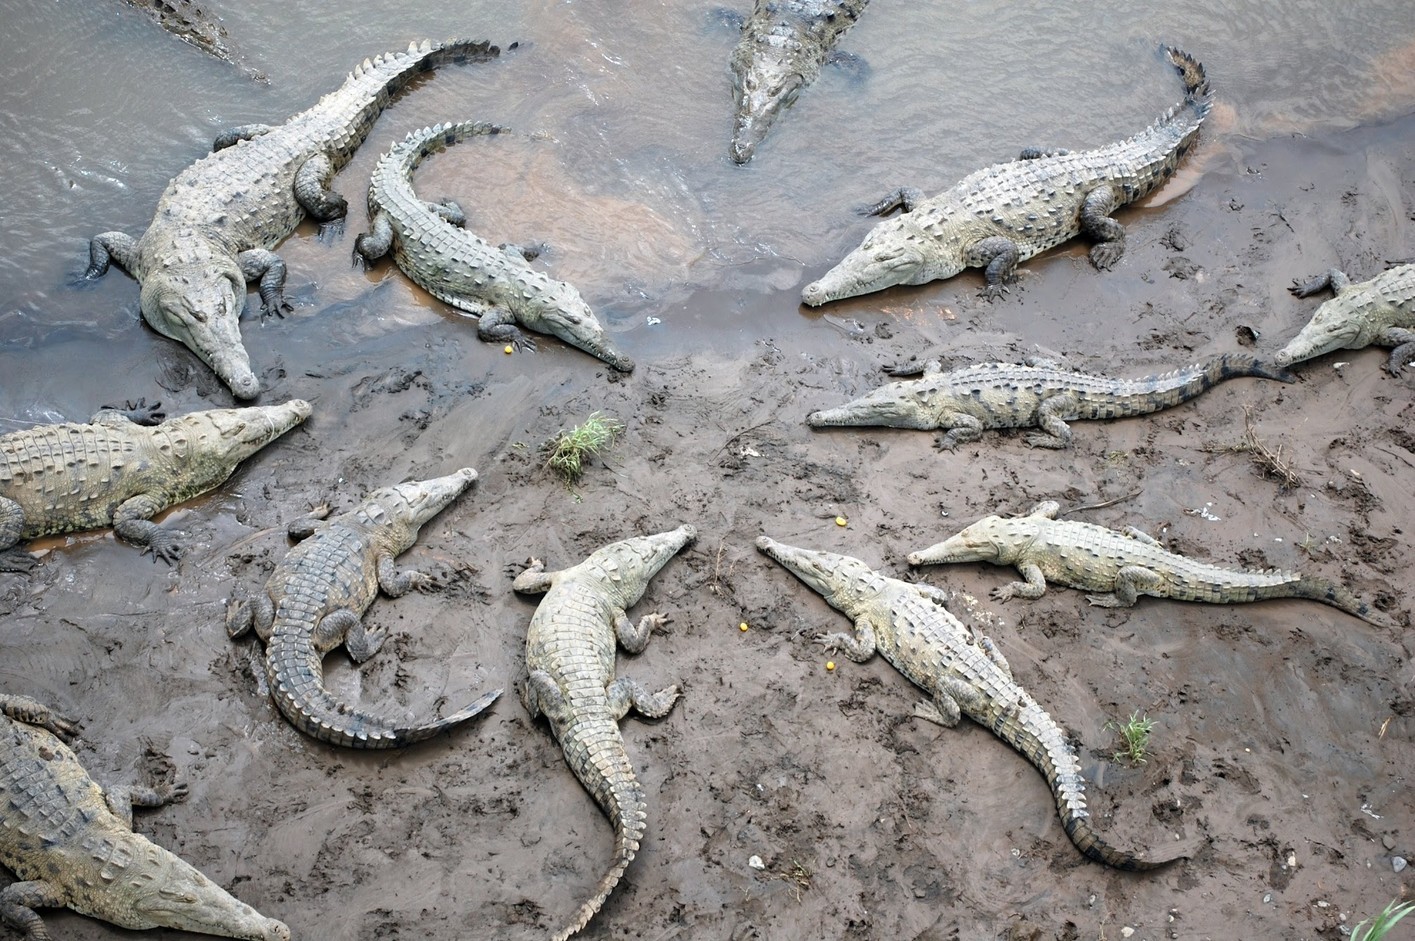 Pollution of the Tárcoles River crocodiles in Costa Rica